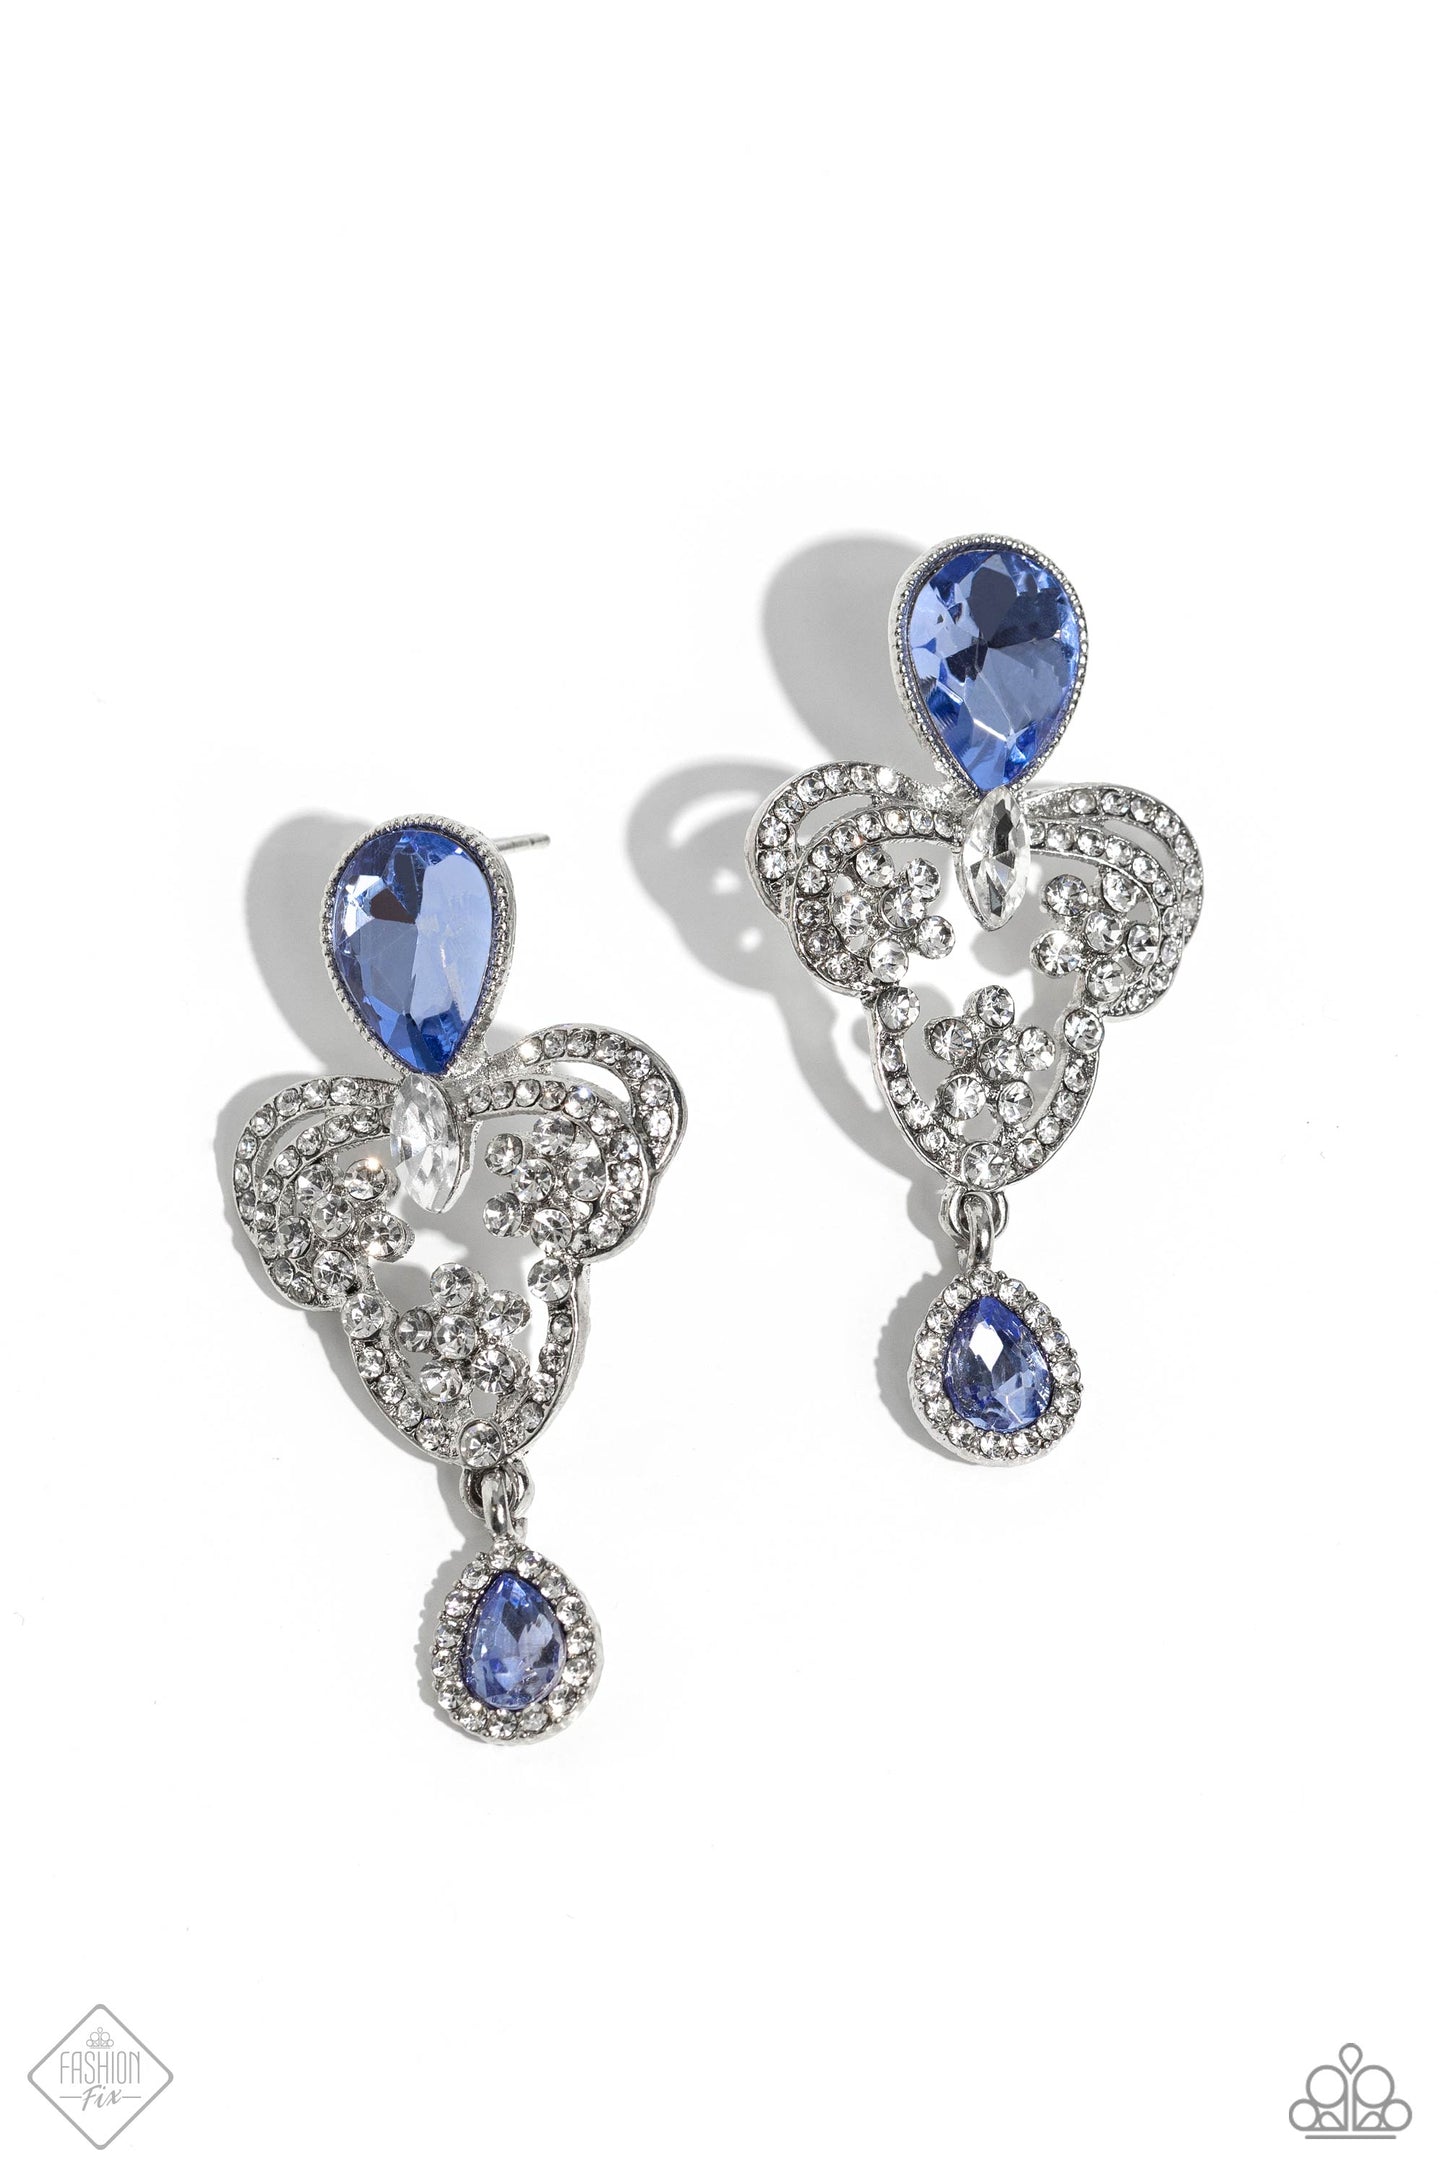 Giving Glam - Blue and Silver Earrings - Paparazzi Accessories - Pressed in a silver textured frame, an upside-down blue teardrop gem gives way to a silver, decorative, chandelier-like frame. The decorative frame swirls with dainty white rhinestones and white marquise-cut gems for a timelessly over-the-top sparkle. Bordered by glassy white rhinestones, an upright, smaller blue teardrop gem creates a dainty fringe at the bottom of the frame for an additional pop of elegant color.